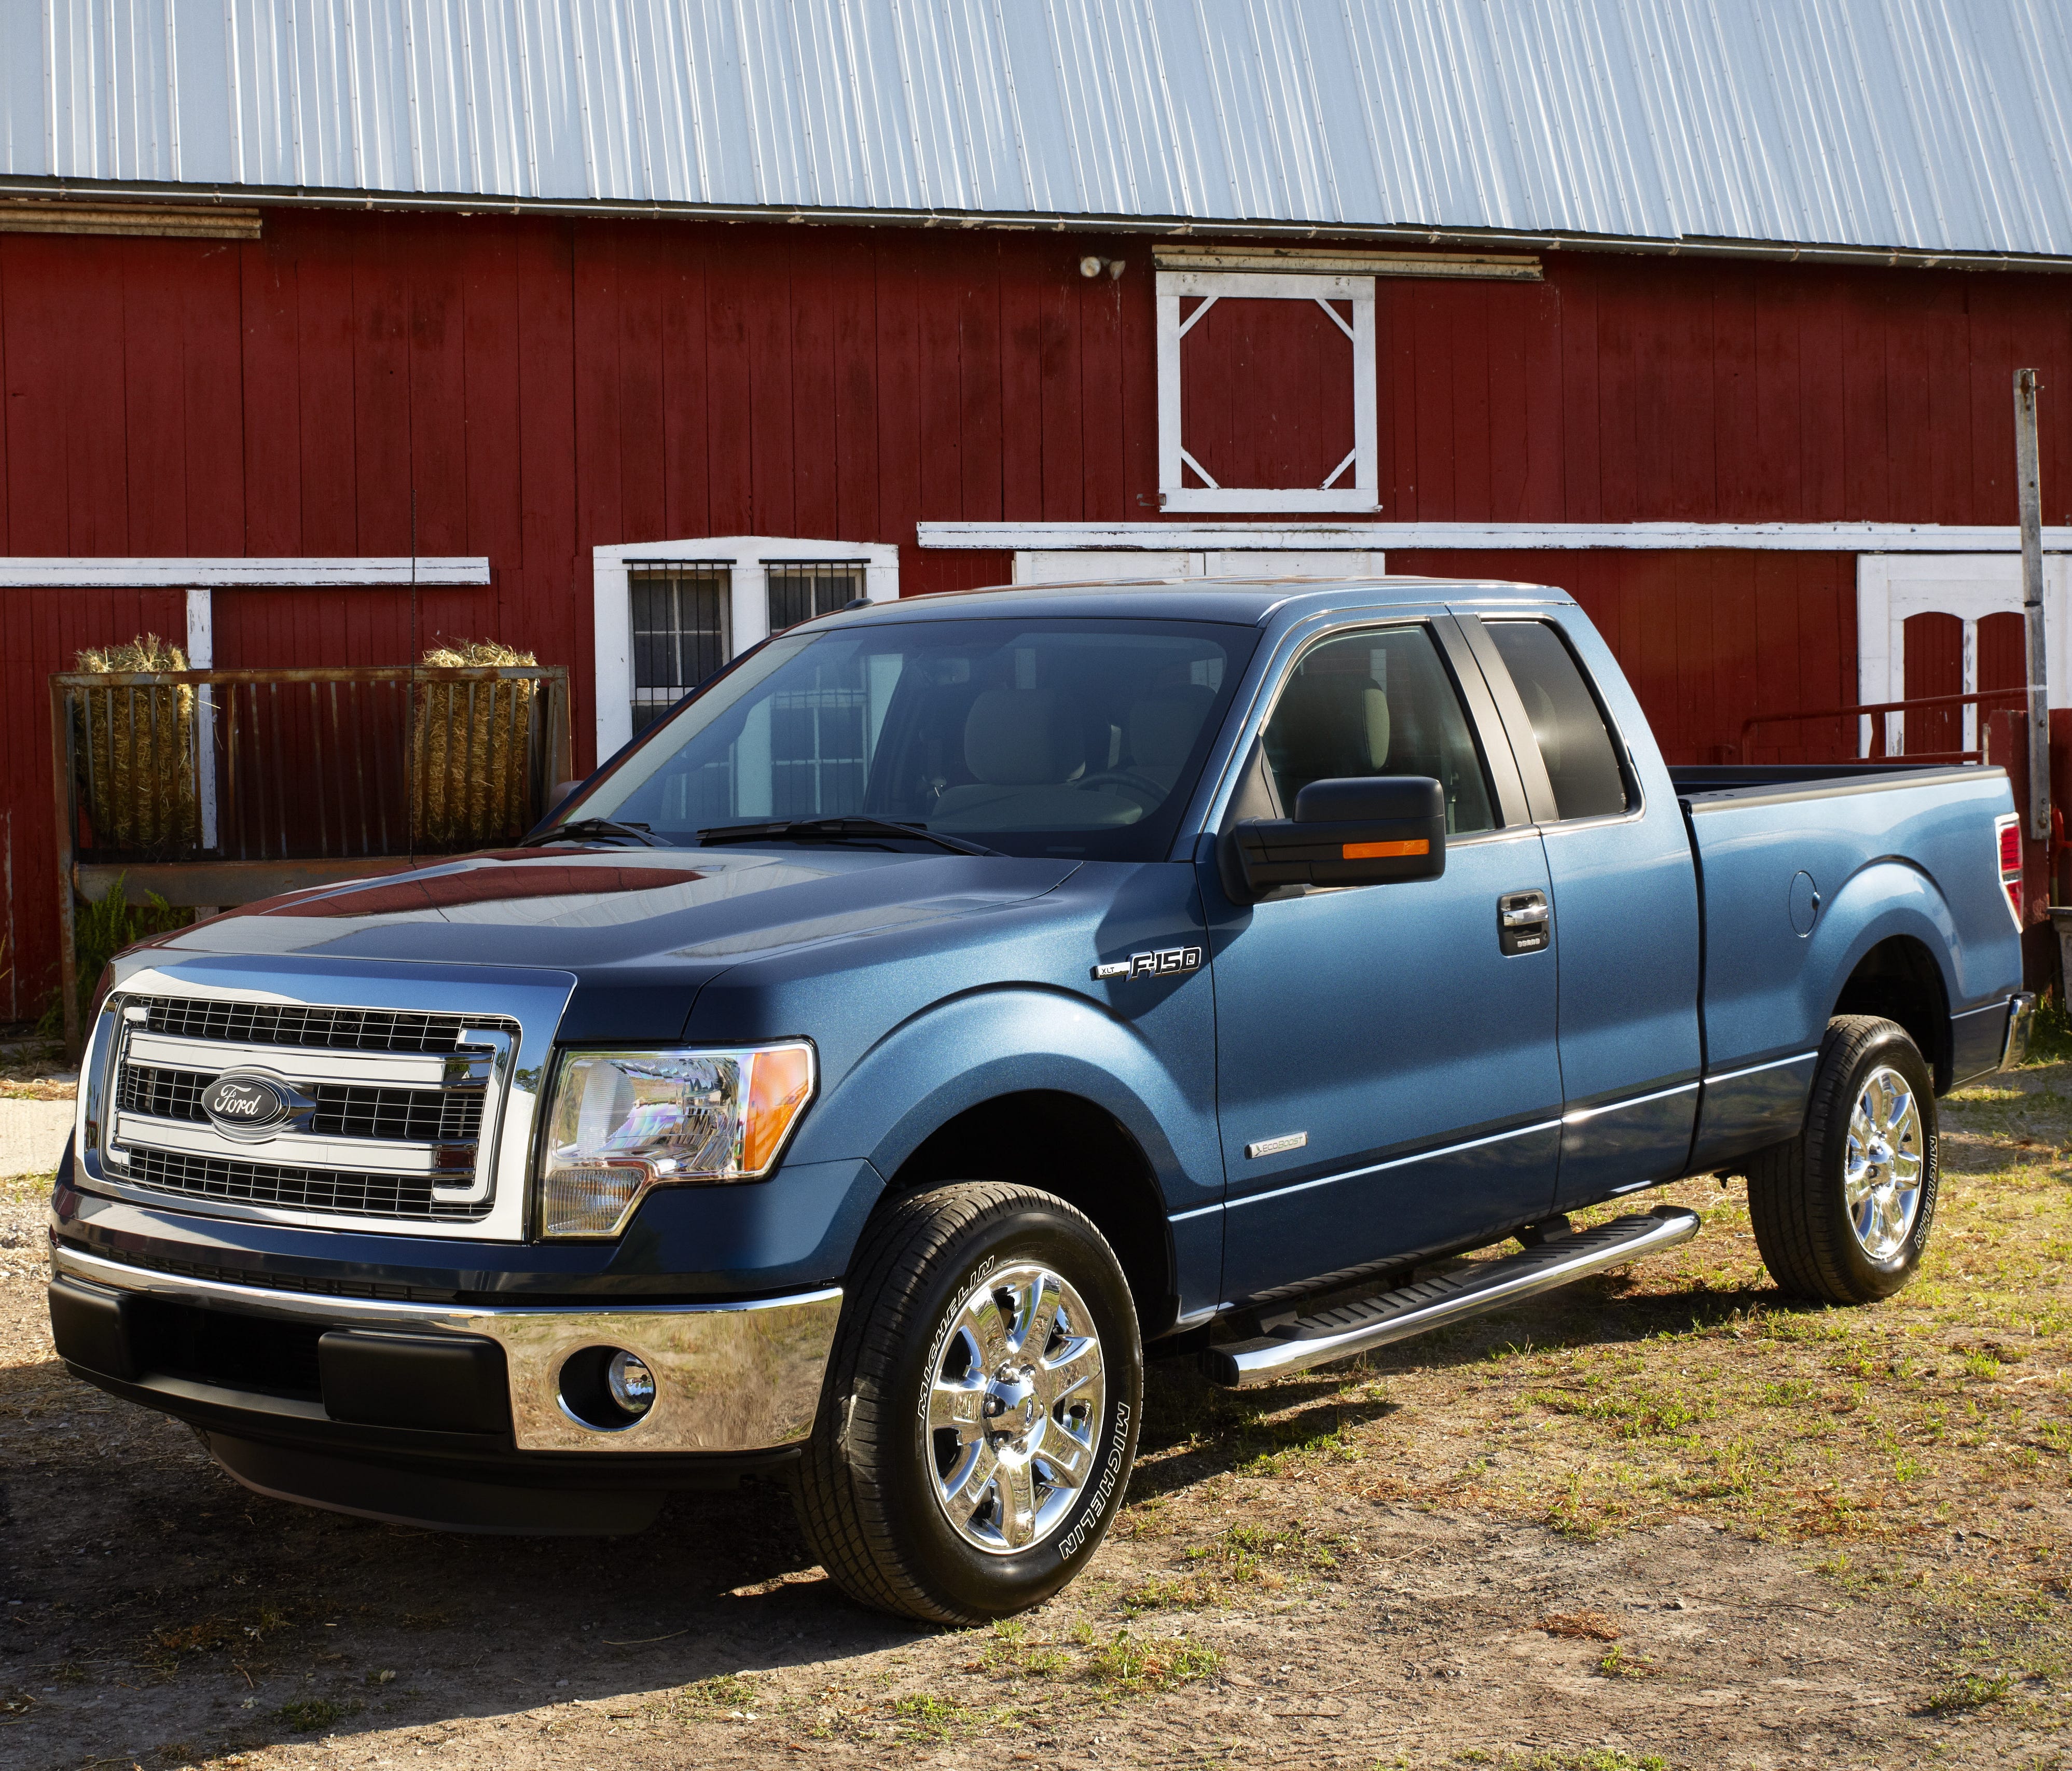 File photo taken in 2012 shows the 2013 Ford F-150 XLT pickup truck.